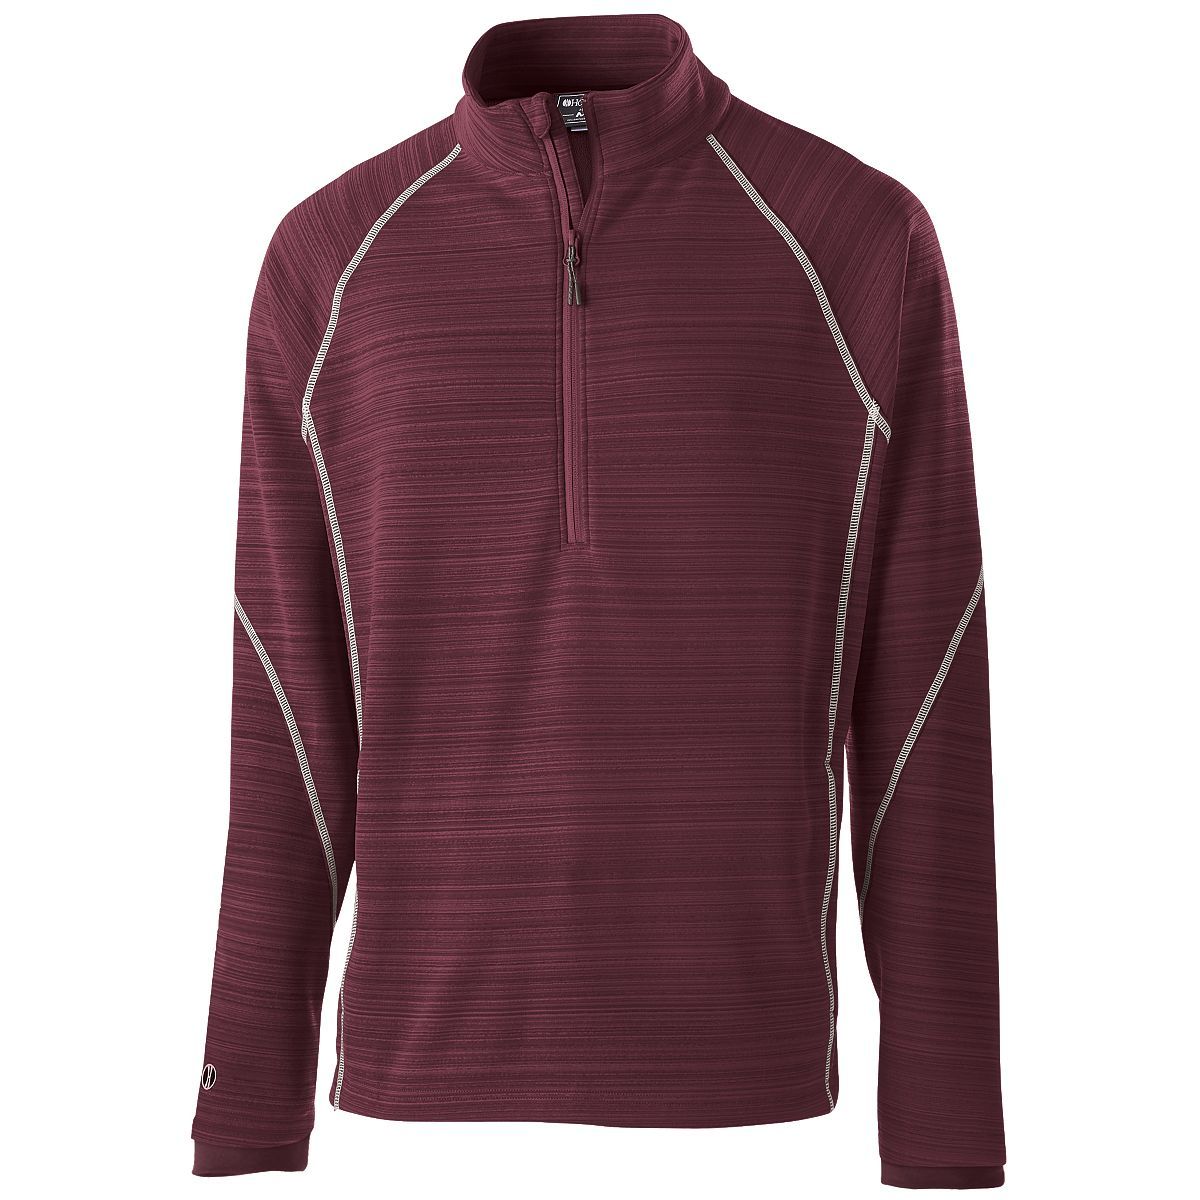 Holloway Deviate Pullover in Maroon  -Part of the Adult, Adult-Pullover, Holloway, Outerwear product lines at KanaleyCreations.com